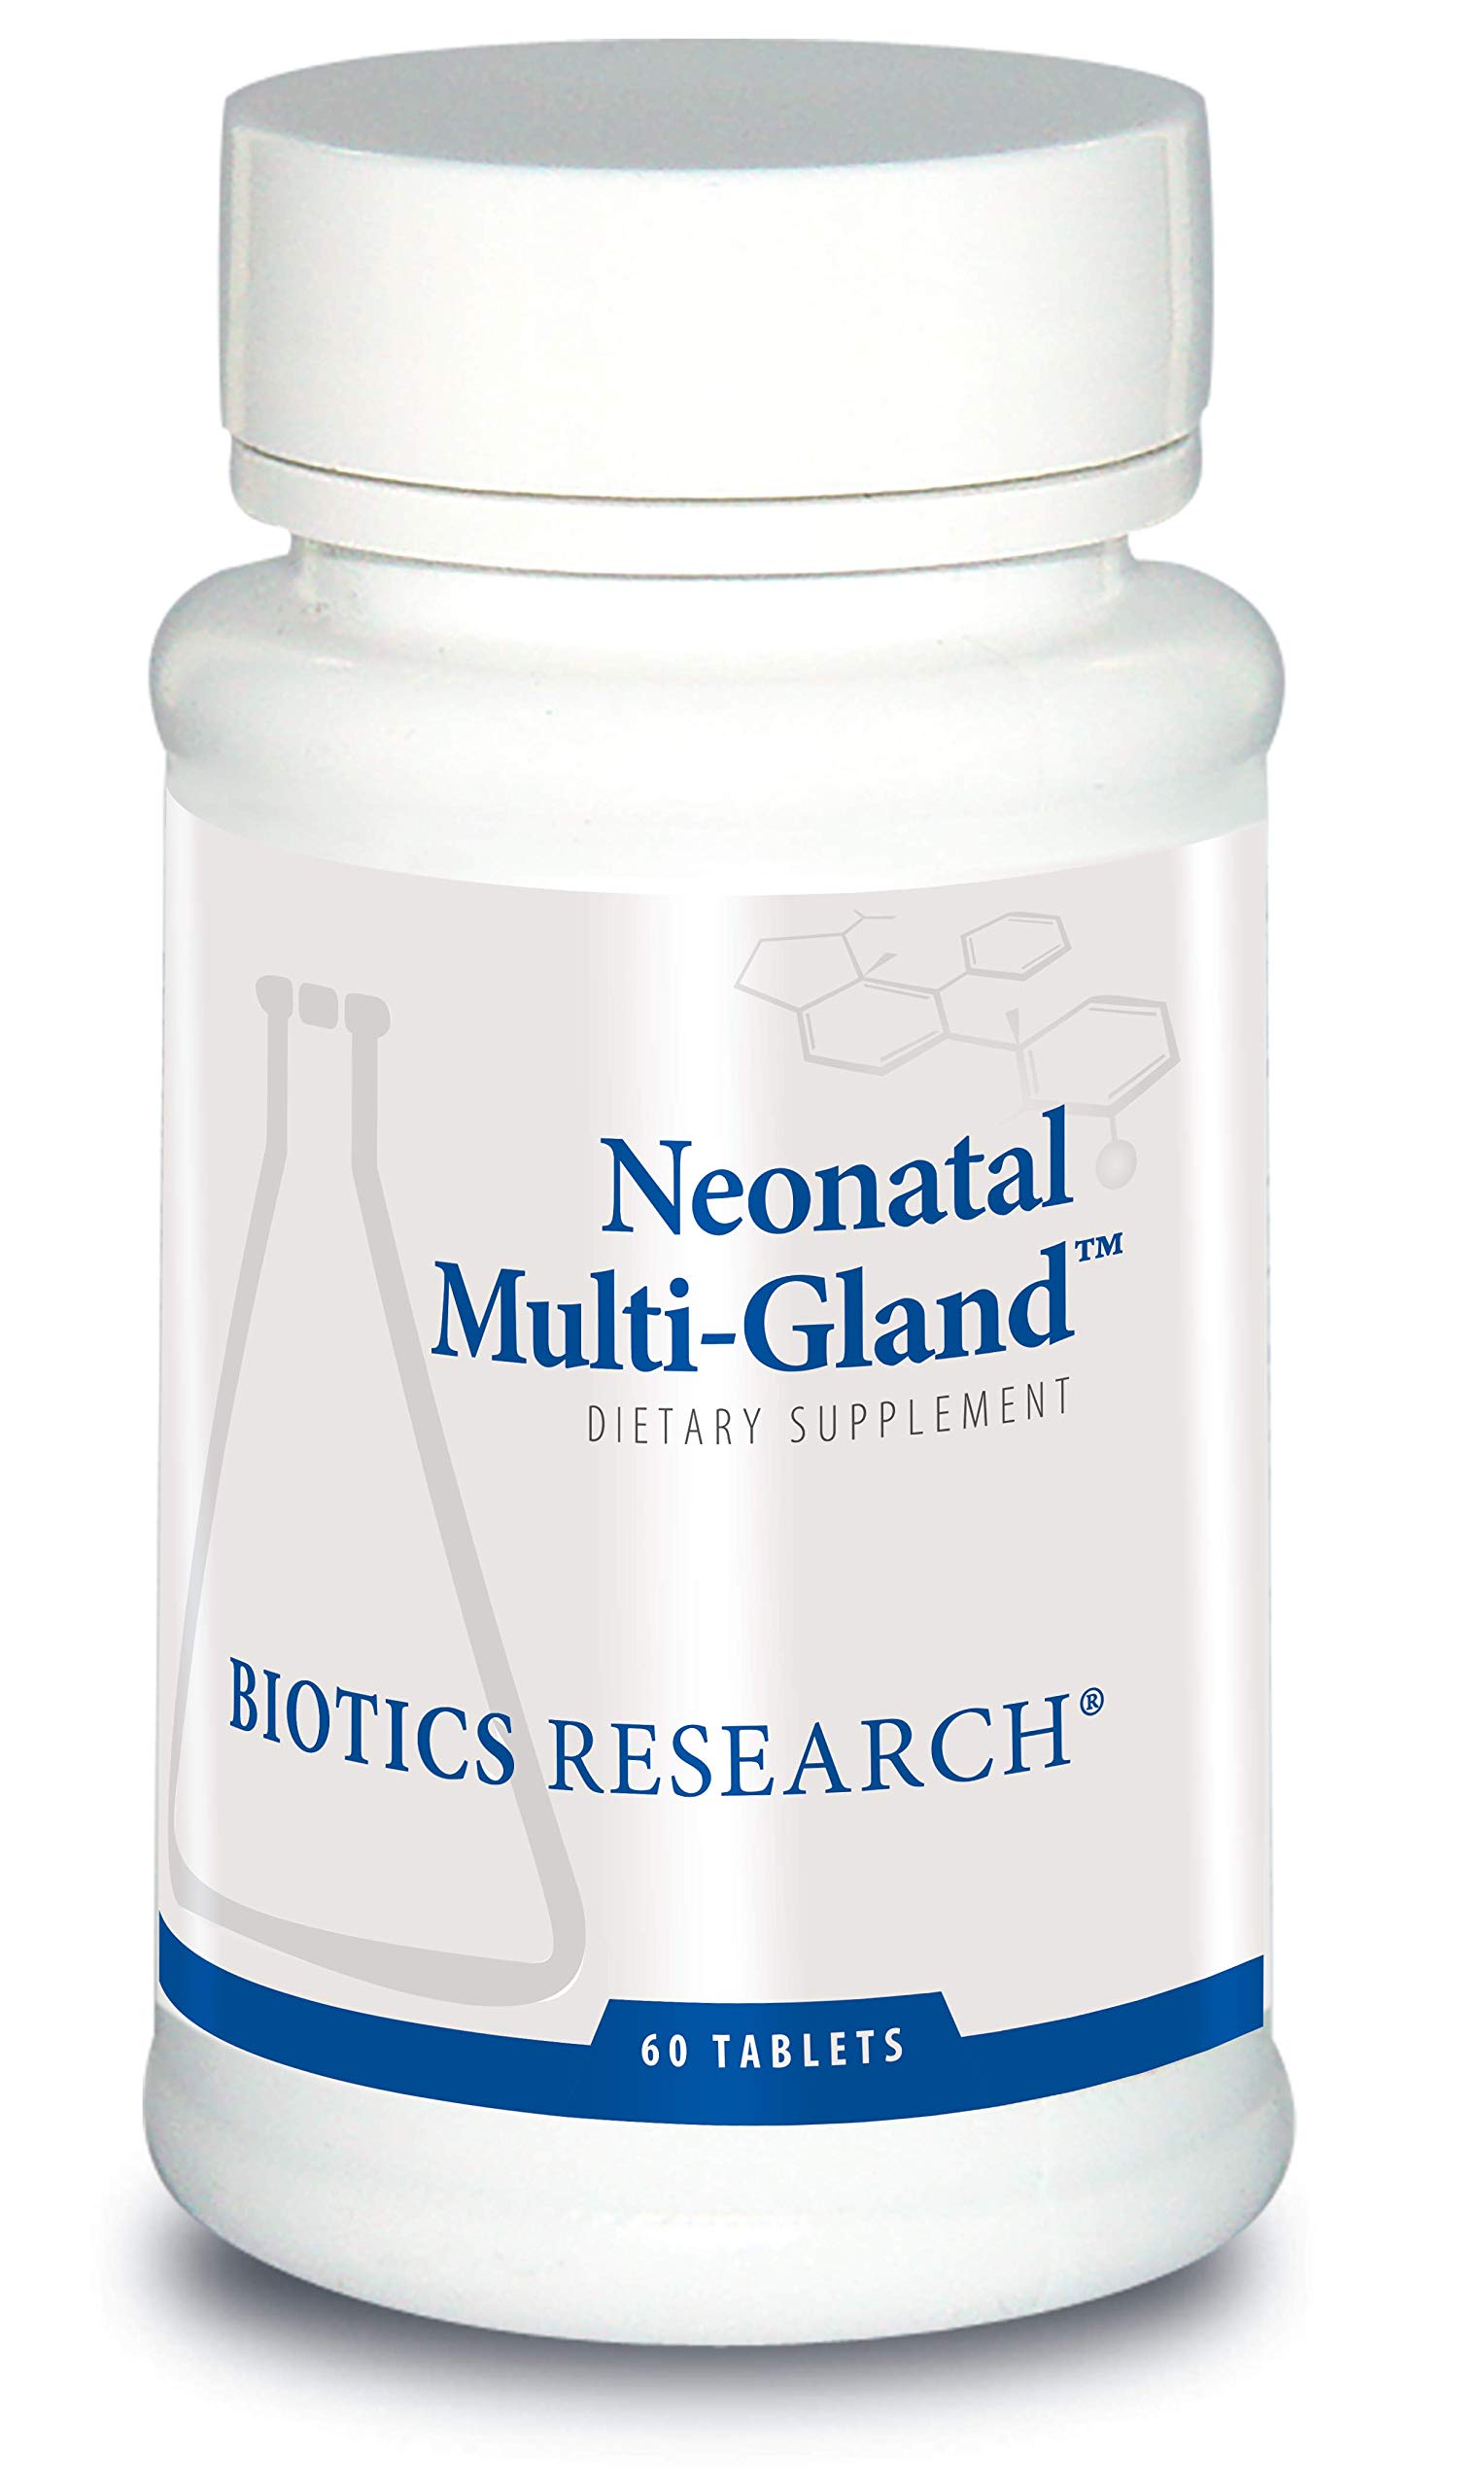 BIOTICS Research Neonatal Multi Gland Mixed Organd and Glandular Concentrates. Broad Spectrum Therapy. Spleen, Heart, Pancreas, Kidney, Brain Liver, Adrenal, Thymus, Pituitary or Hypothalamus 60Tabs